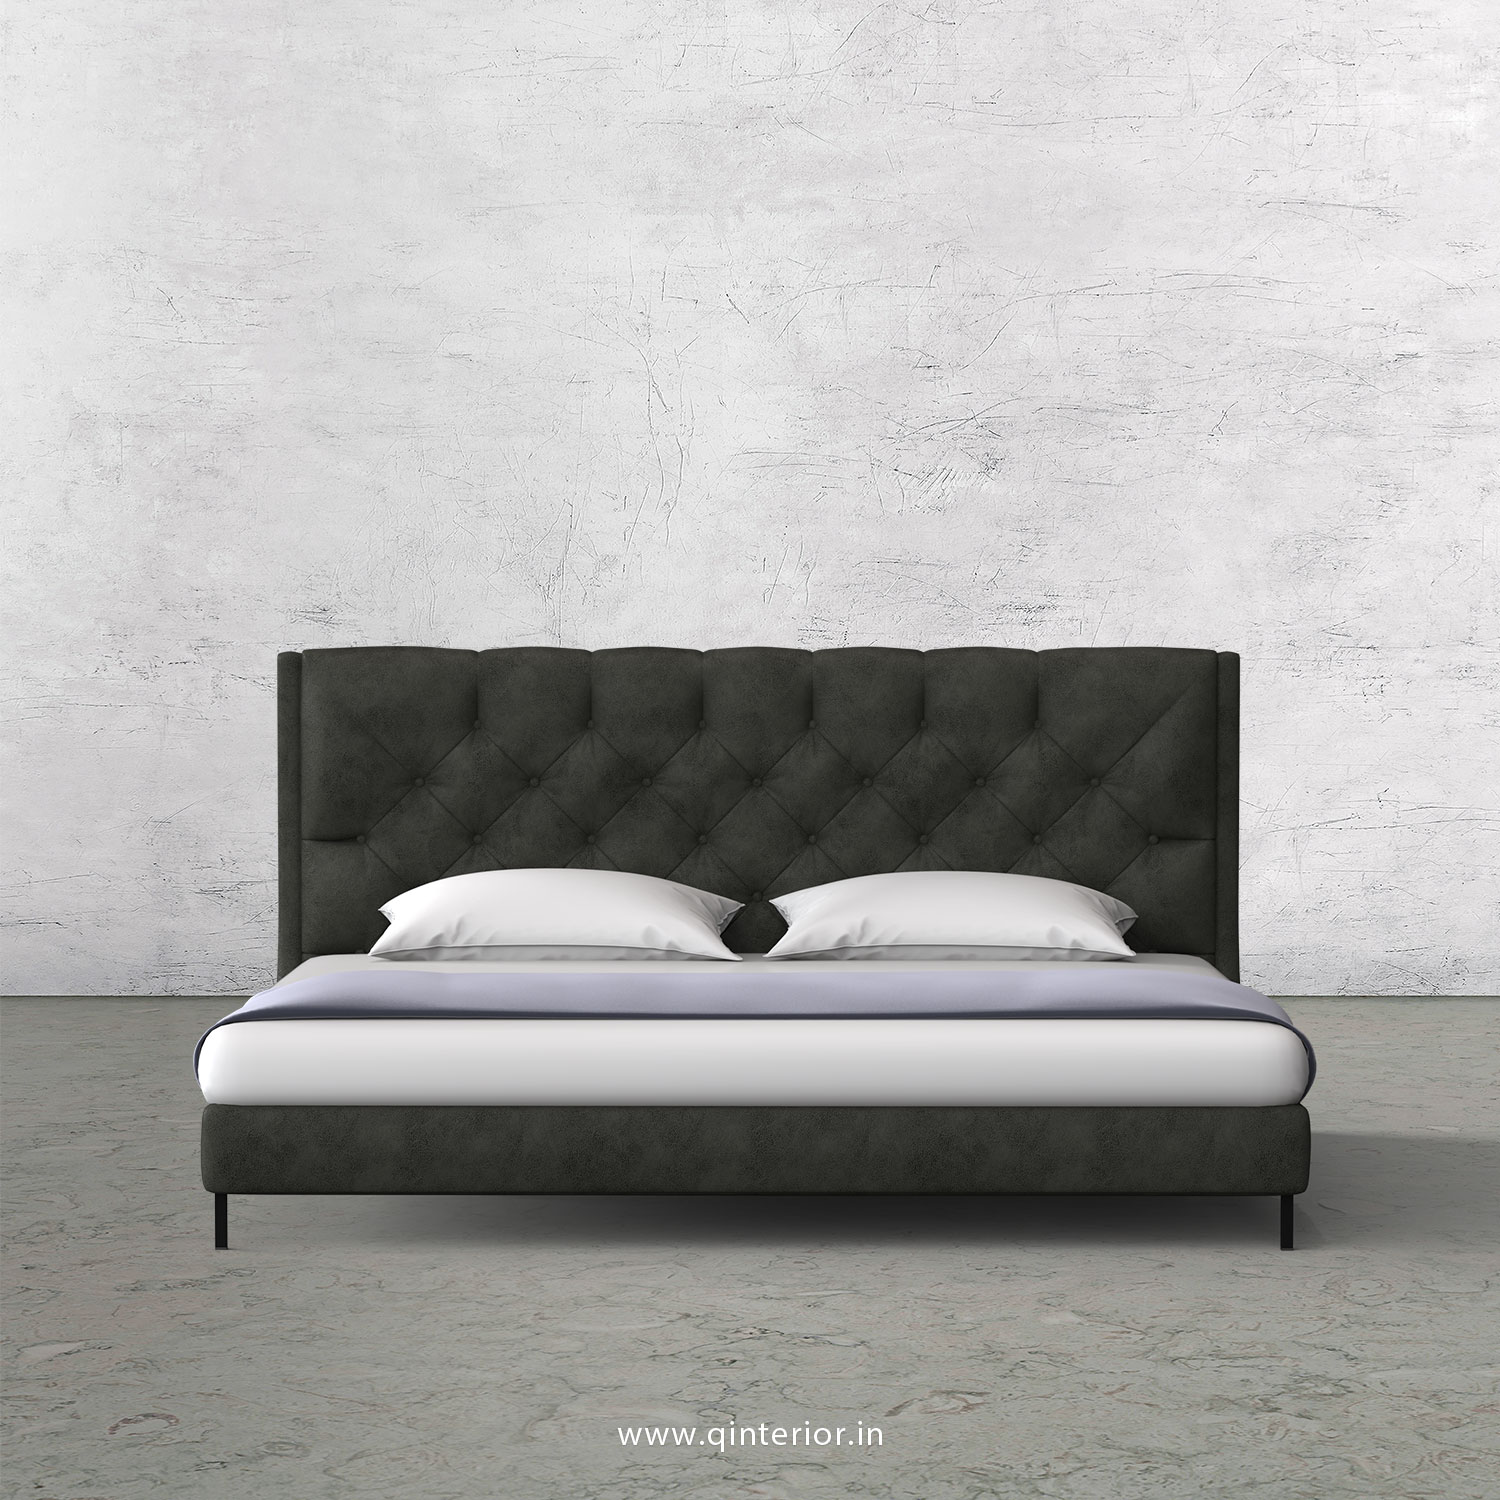 Scorpius King Size Bed in Fab Leather Fabric - KBD003 FL07